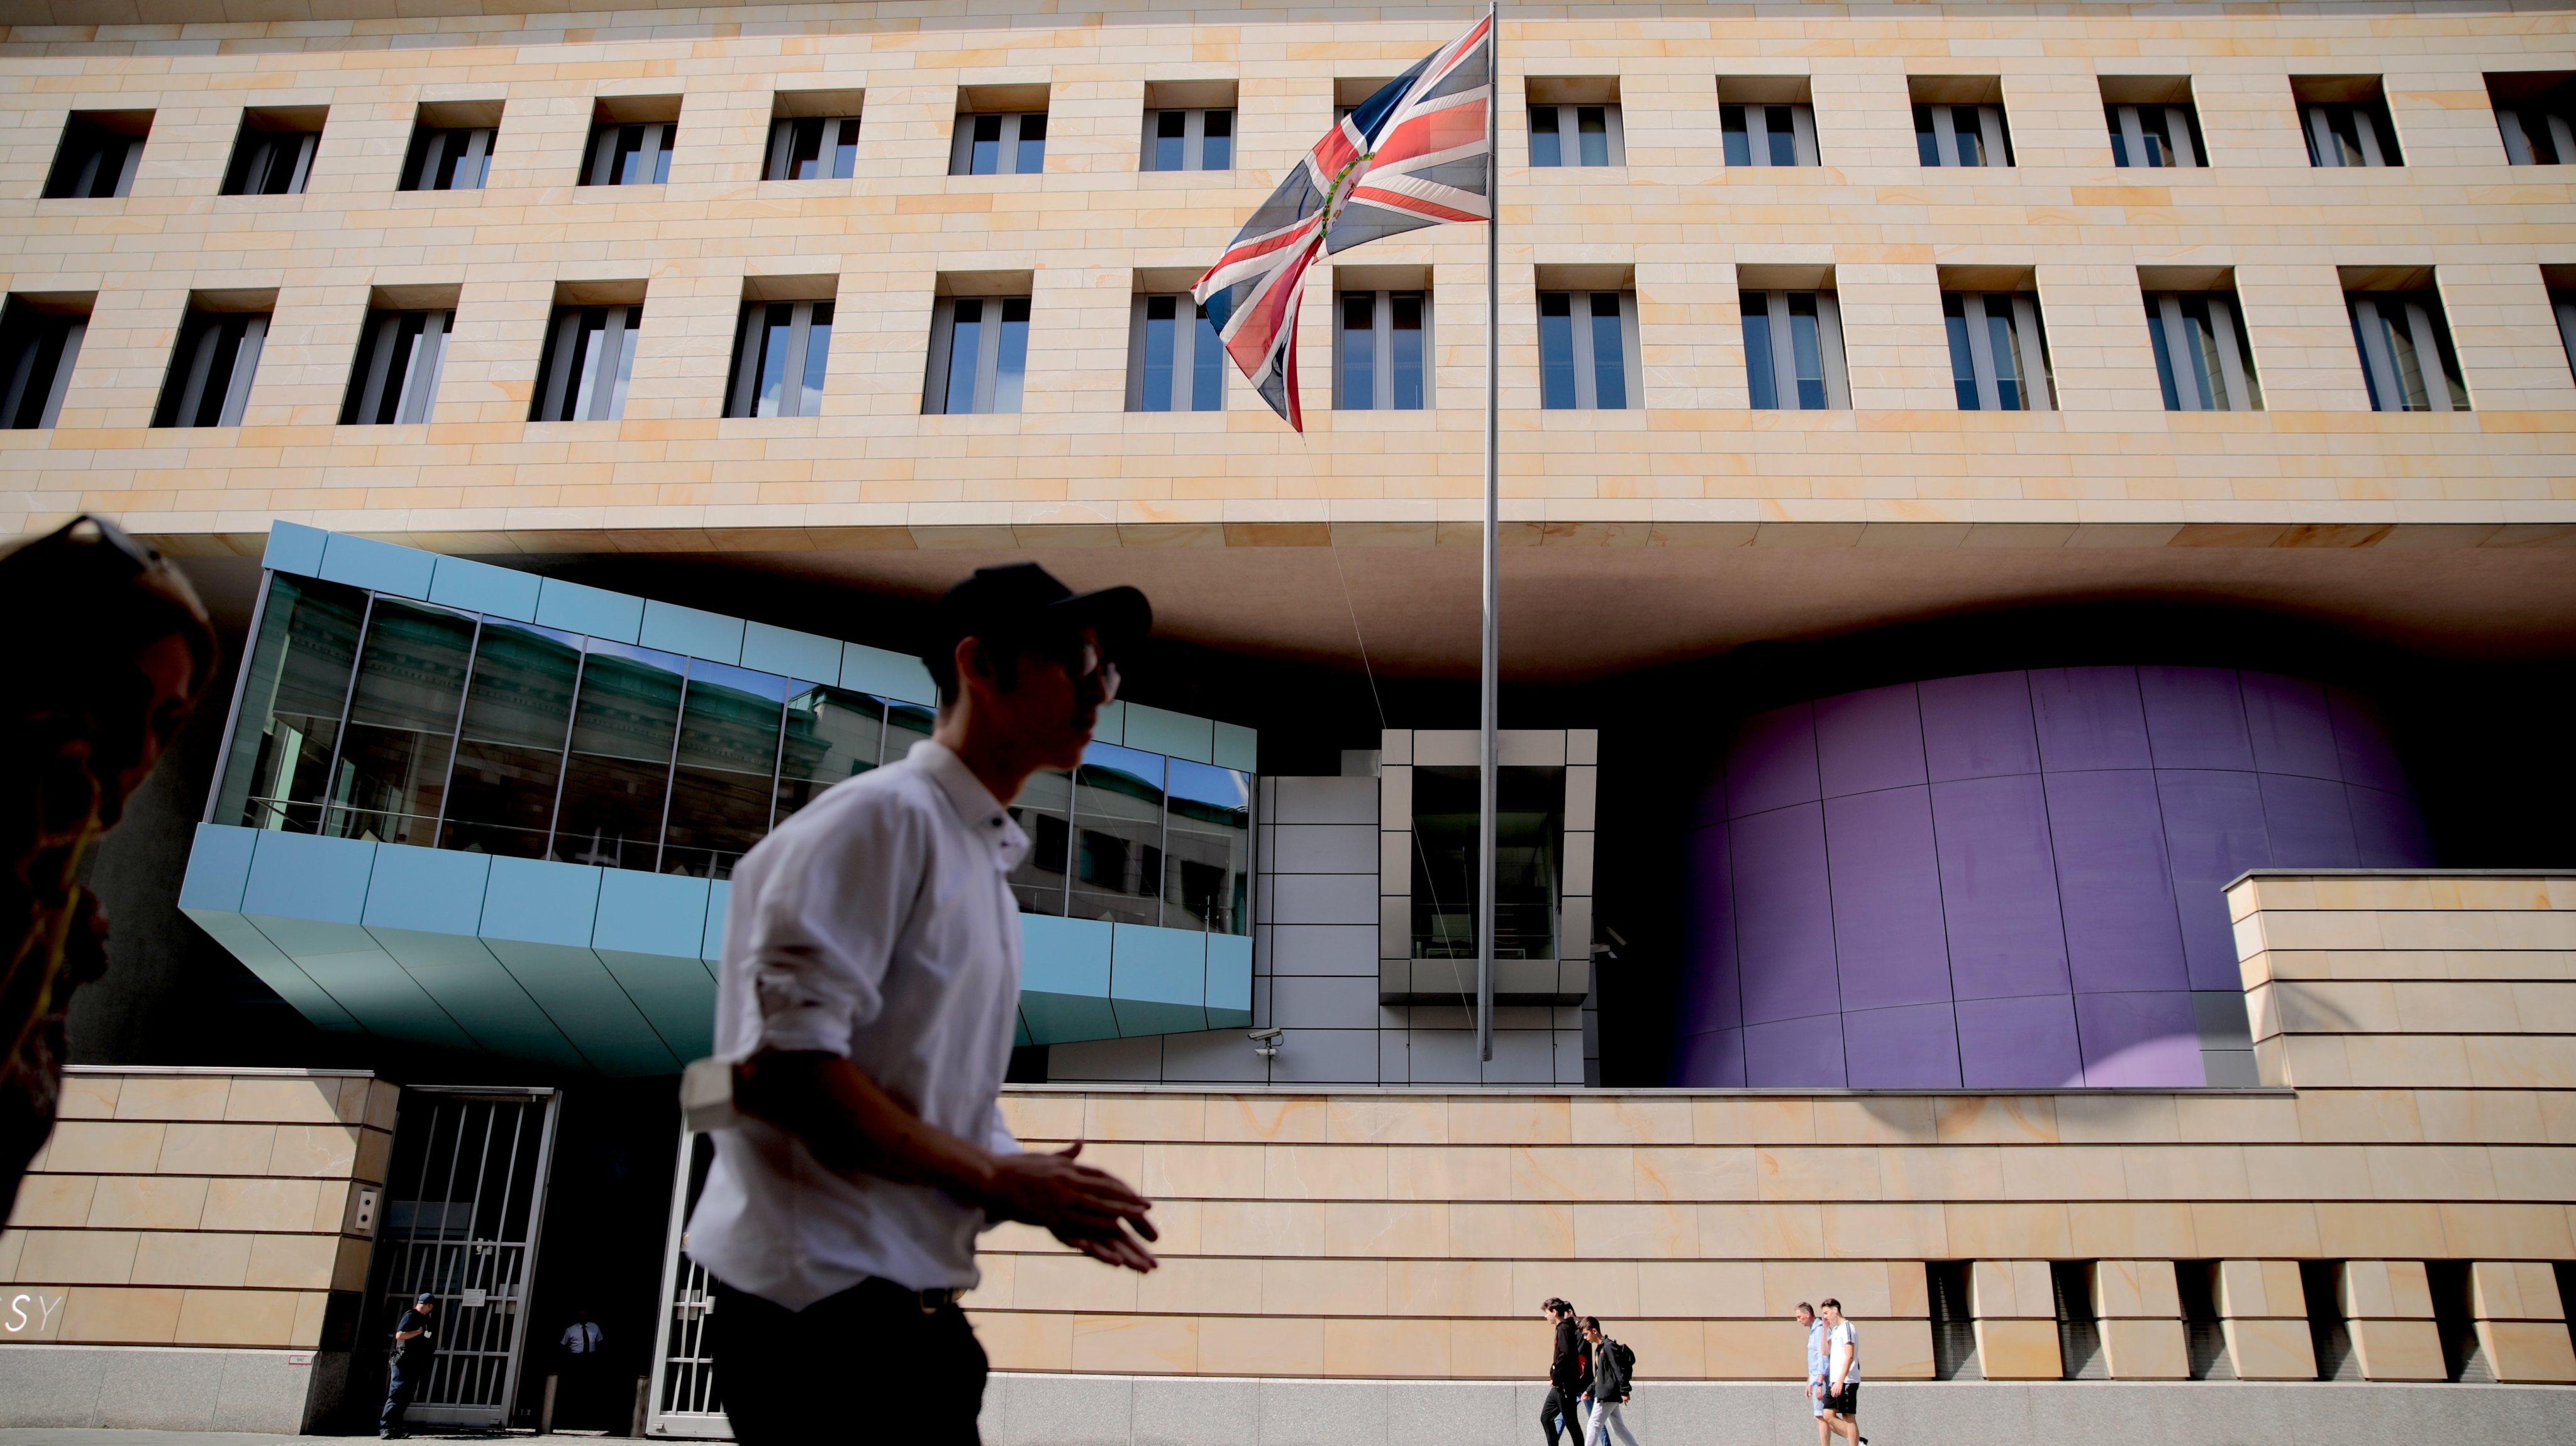 British Embassy Employee Arrested On Spying Charge